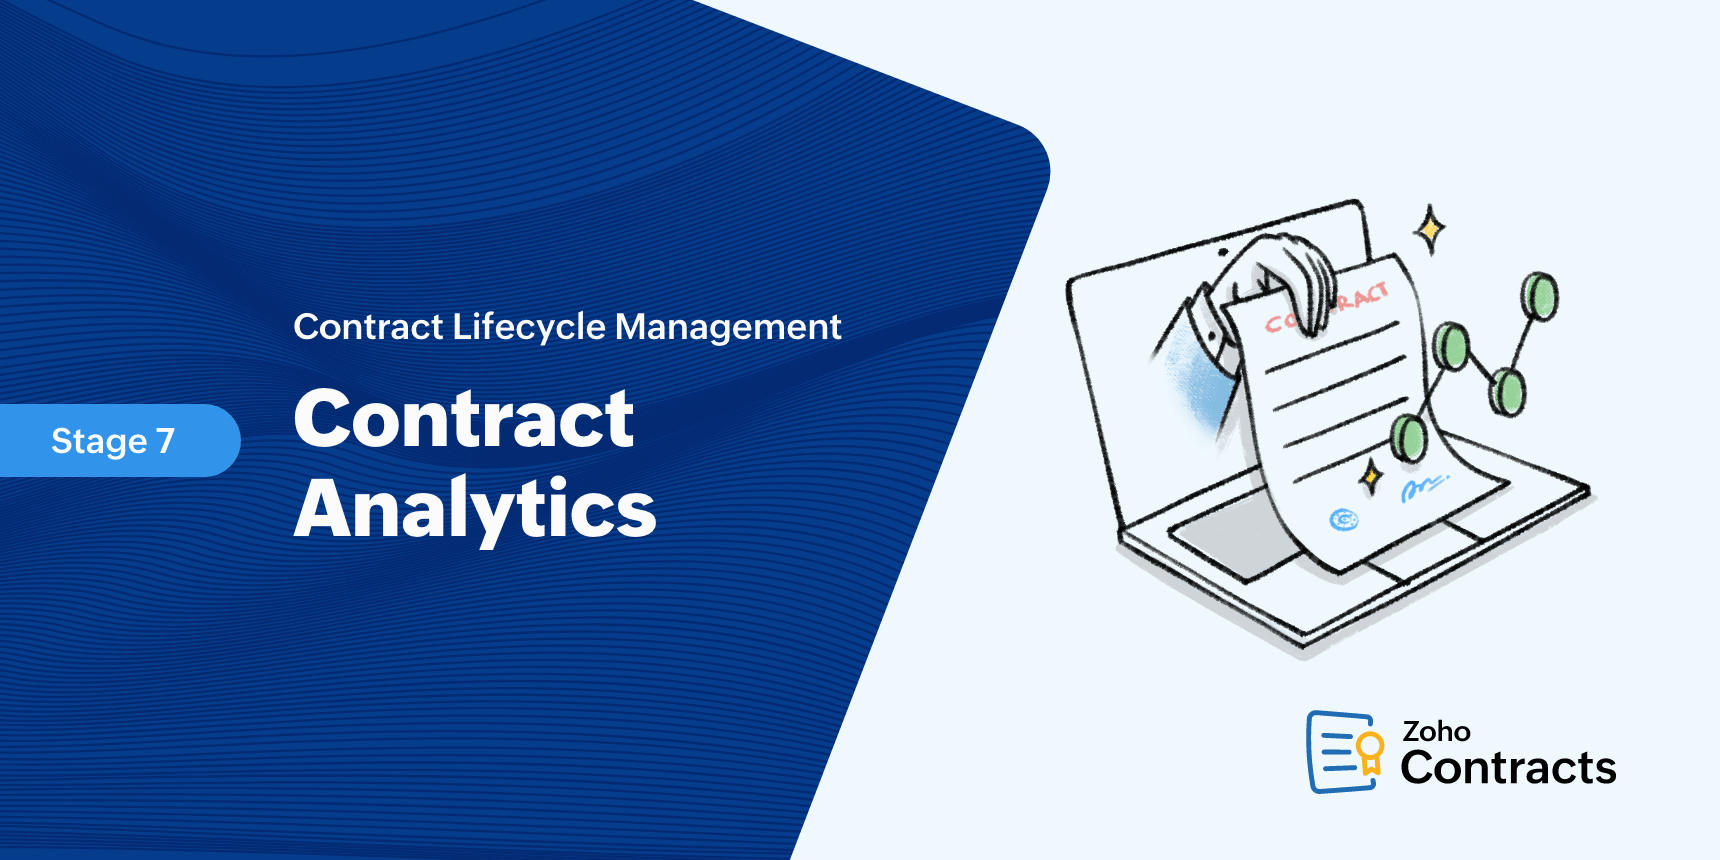 Contractual analytics | Contract Lifecycle Management